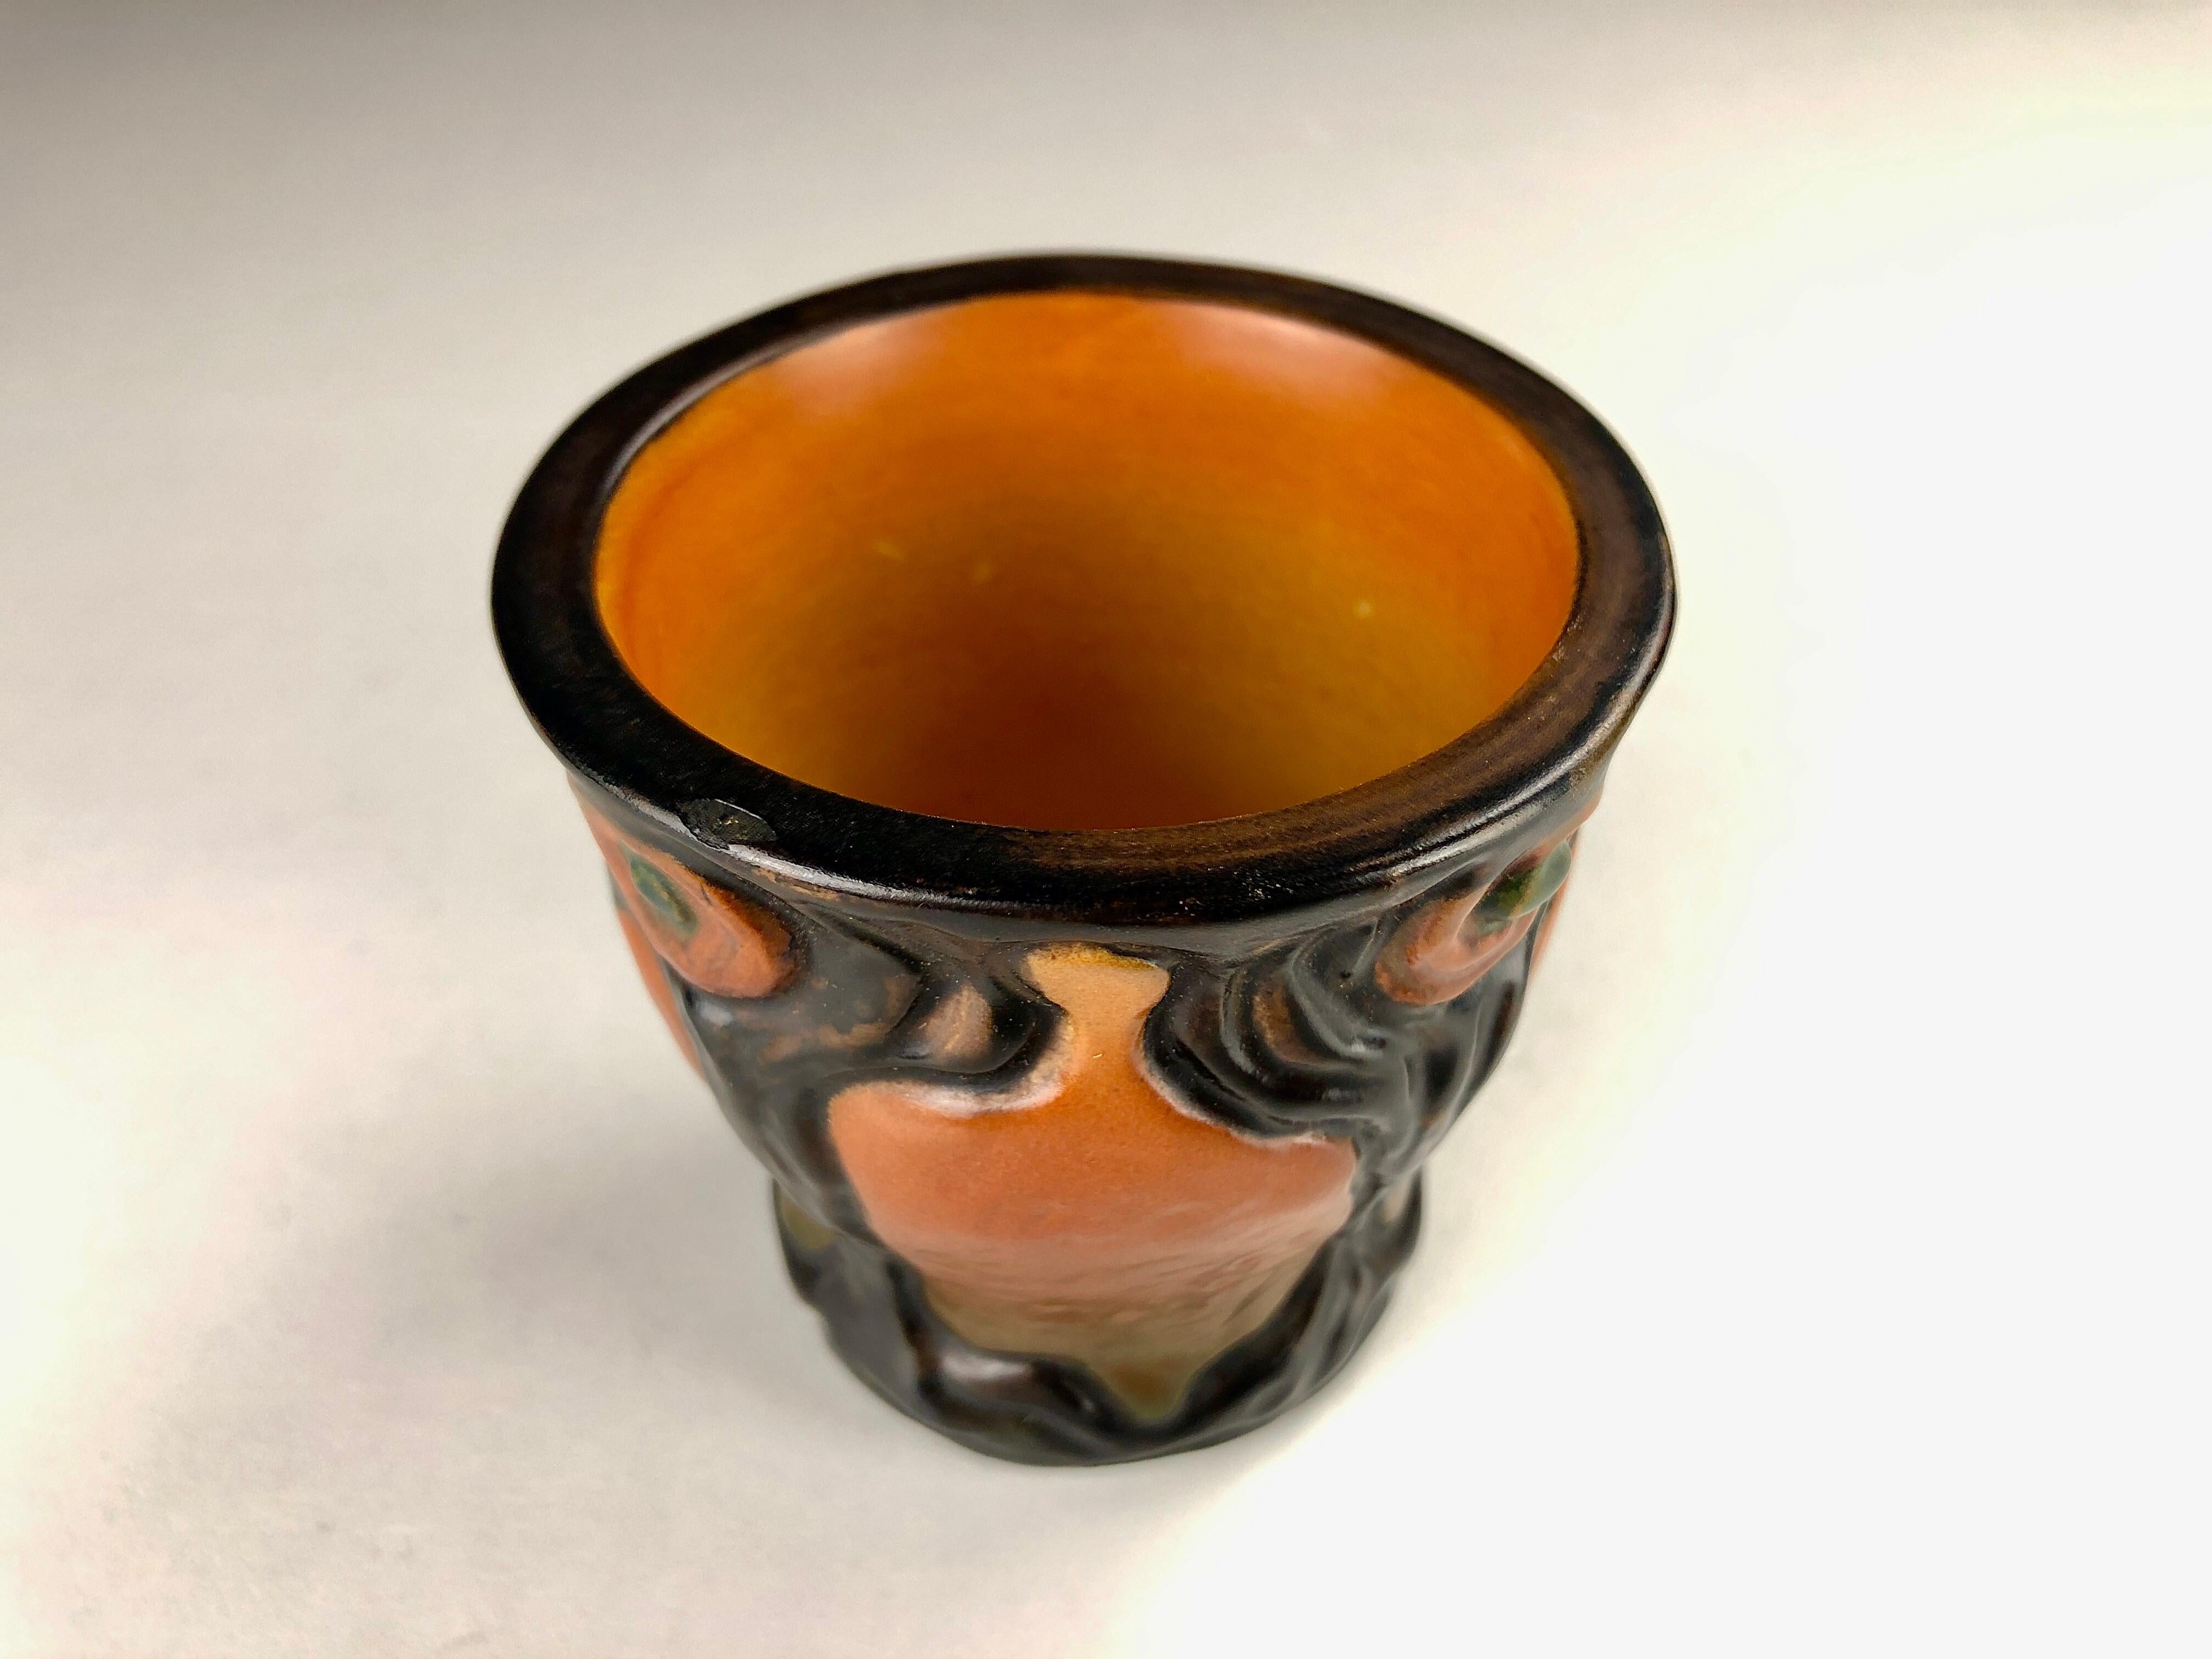 1920's Hand-Crafted Small Danish Art Nouveau Vase or Bowl by P. Ipsens Enke In Good Condition For Sale In Knebel, DK